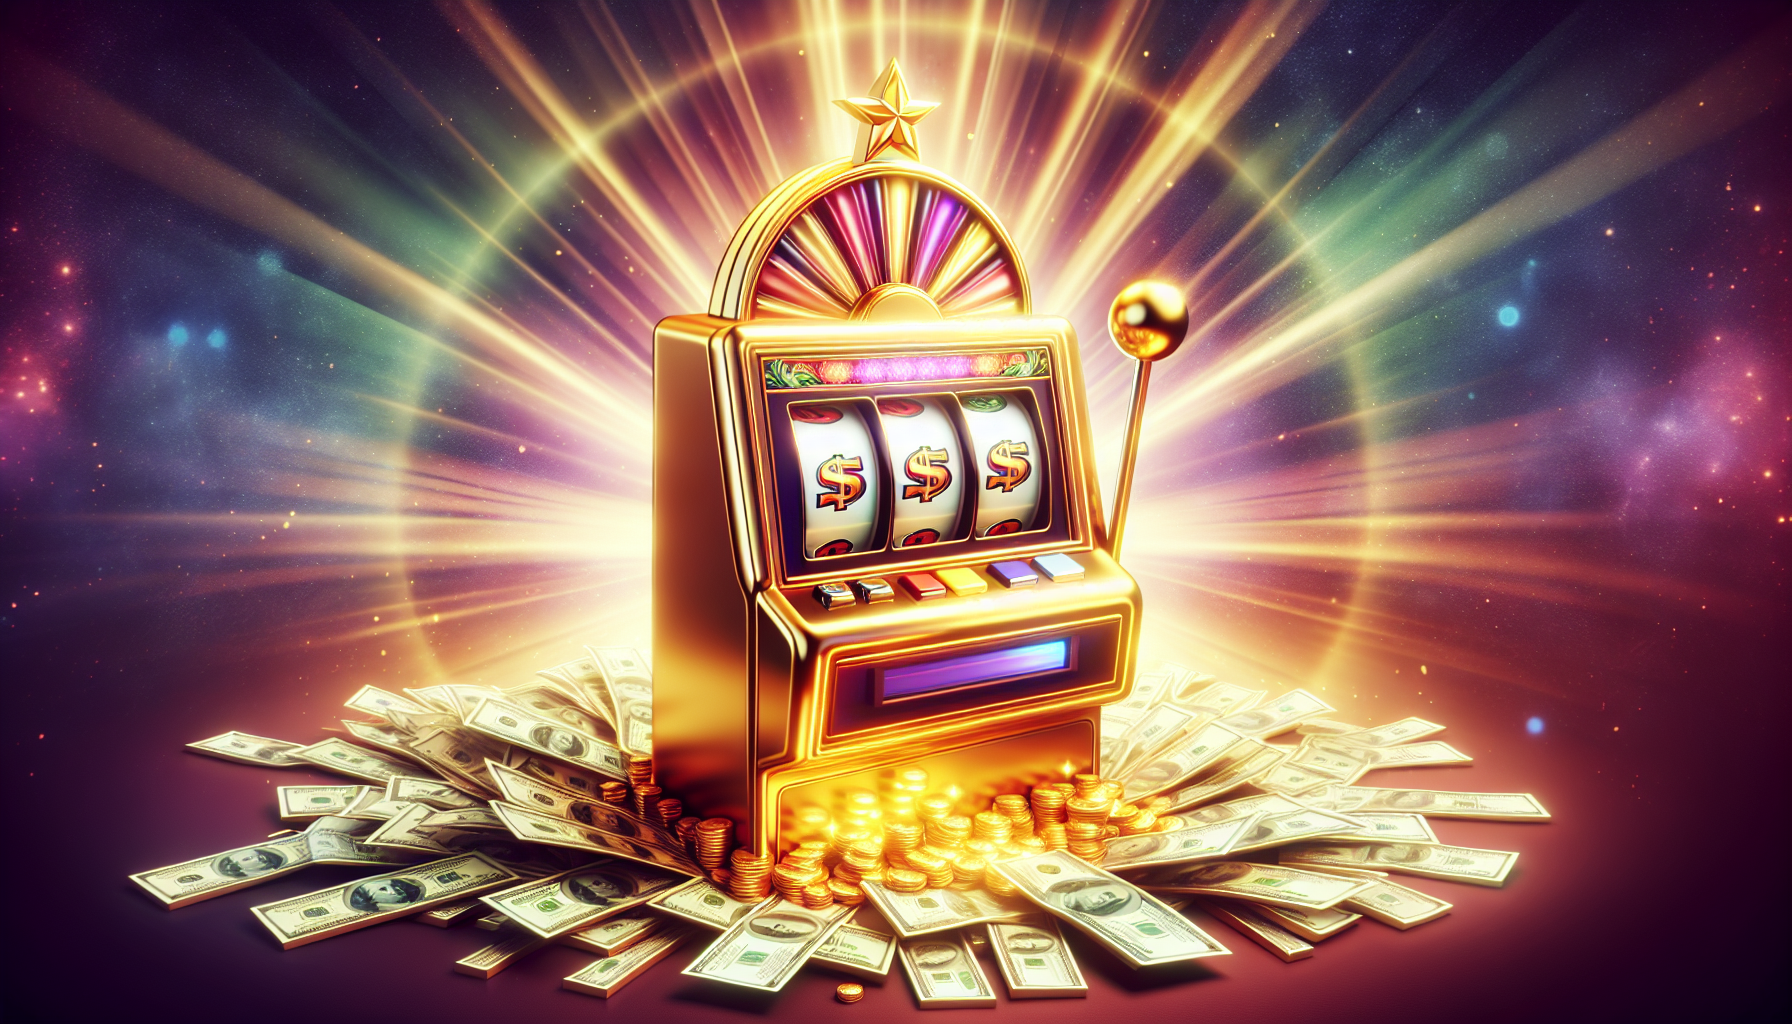 Are There Online Slots That Pay Real Money?